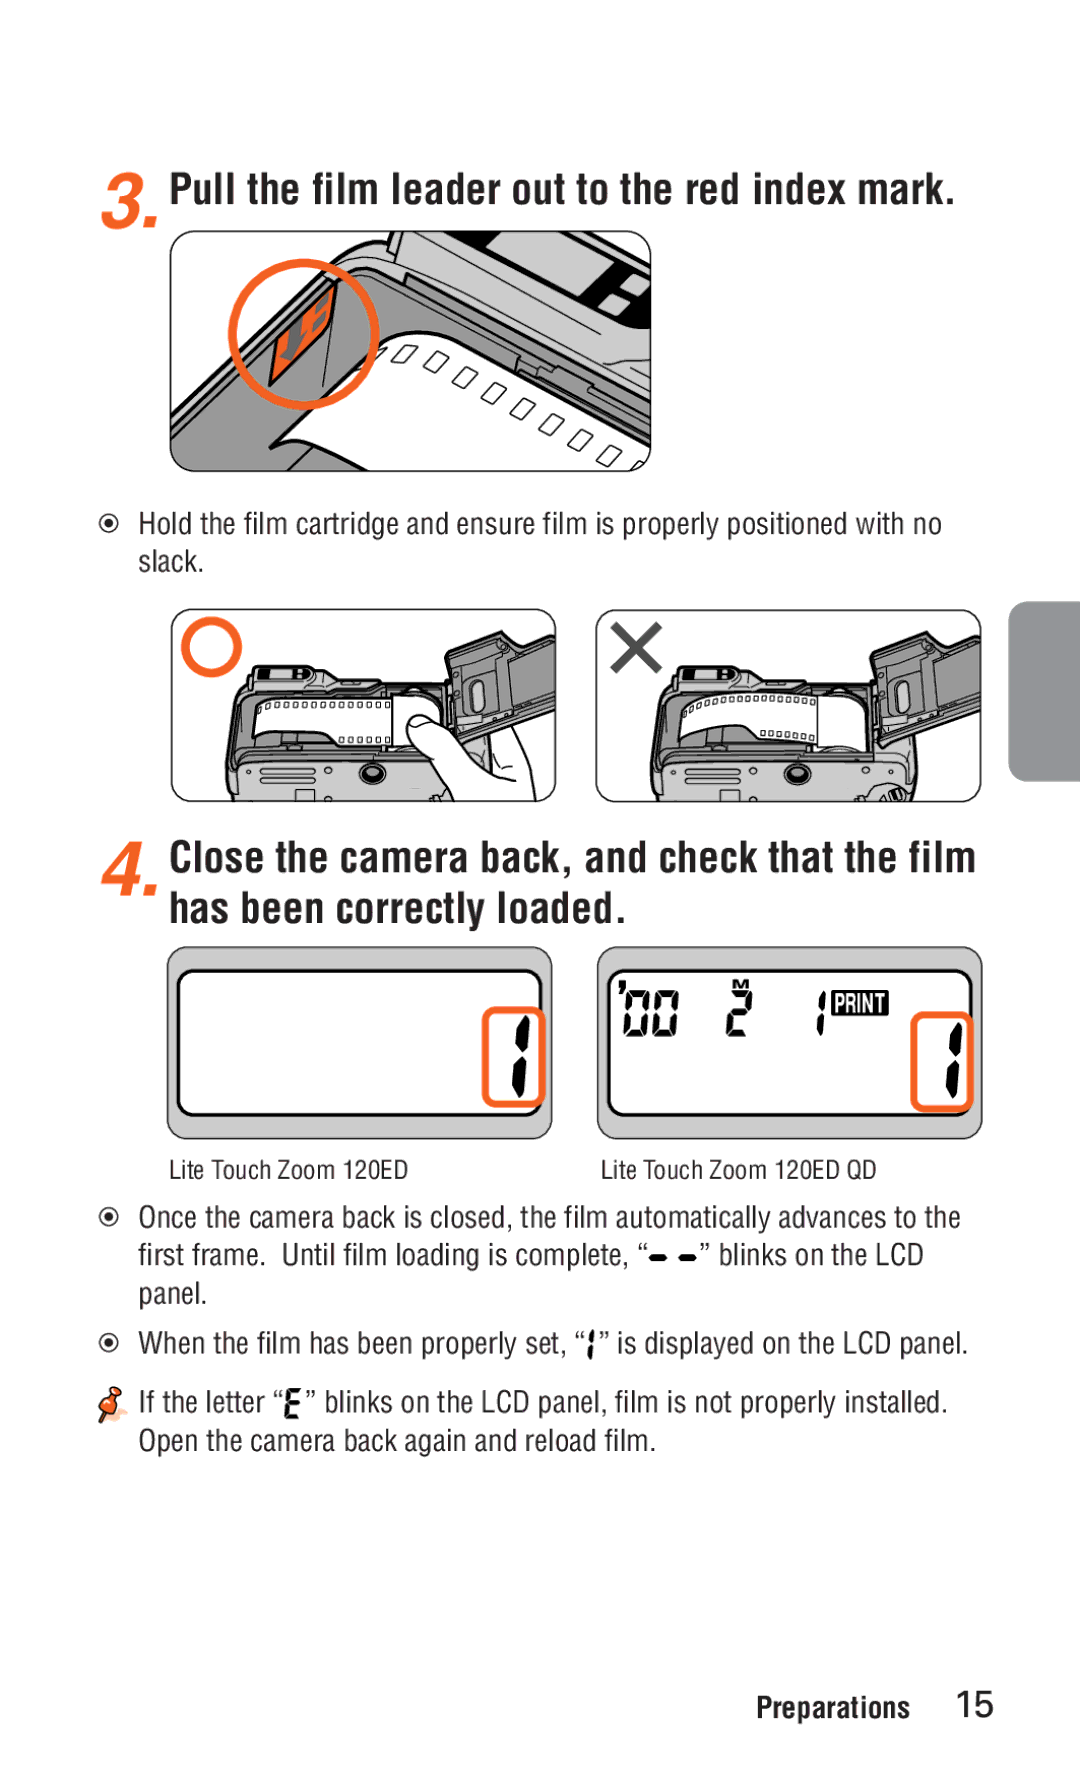 Nikon ED 120 instruction manual Pull the film leader out to the red index mark 